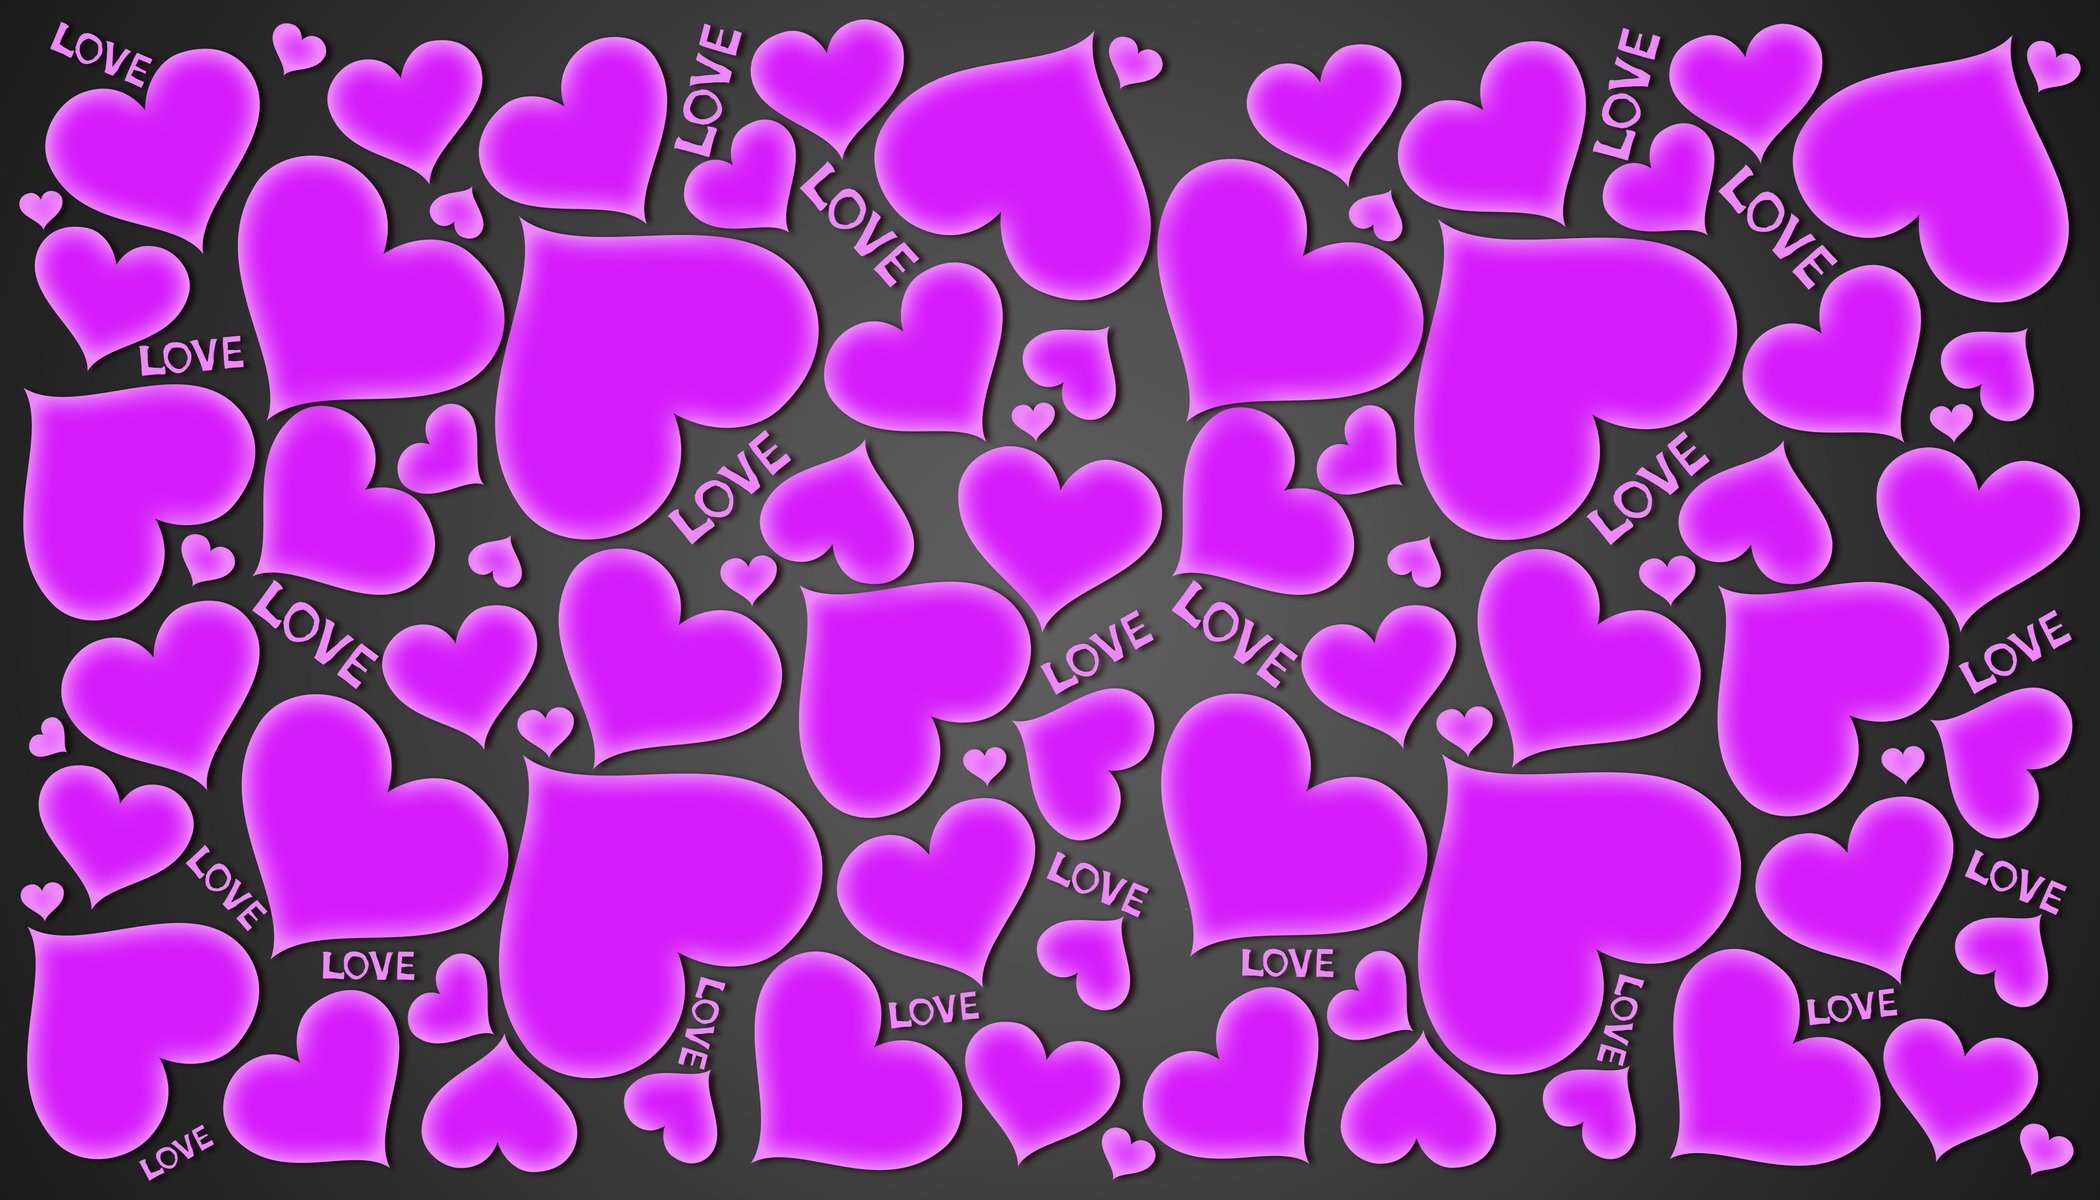 iPhone Wallpaper 3d Hearts by Michelle Mabelle on Dribbble